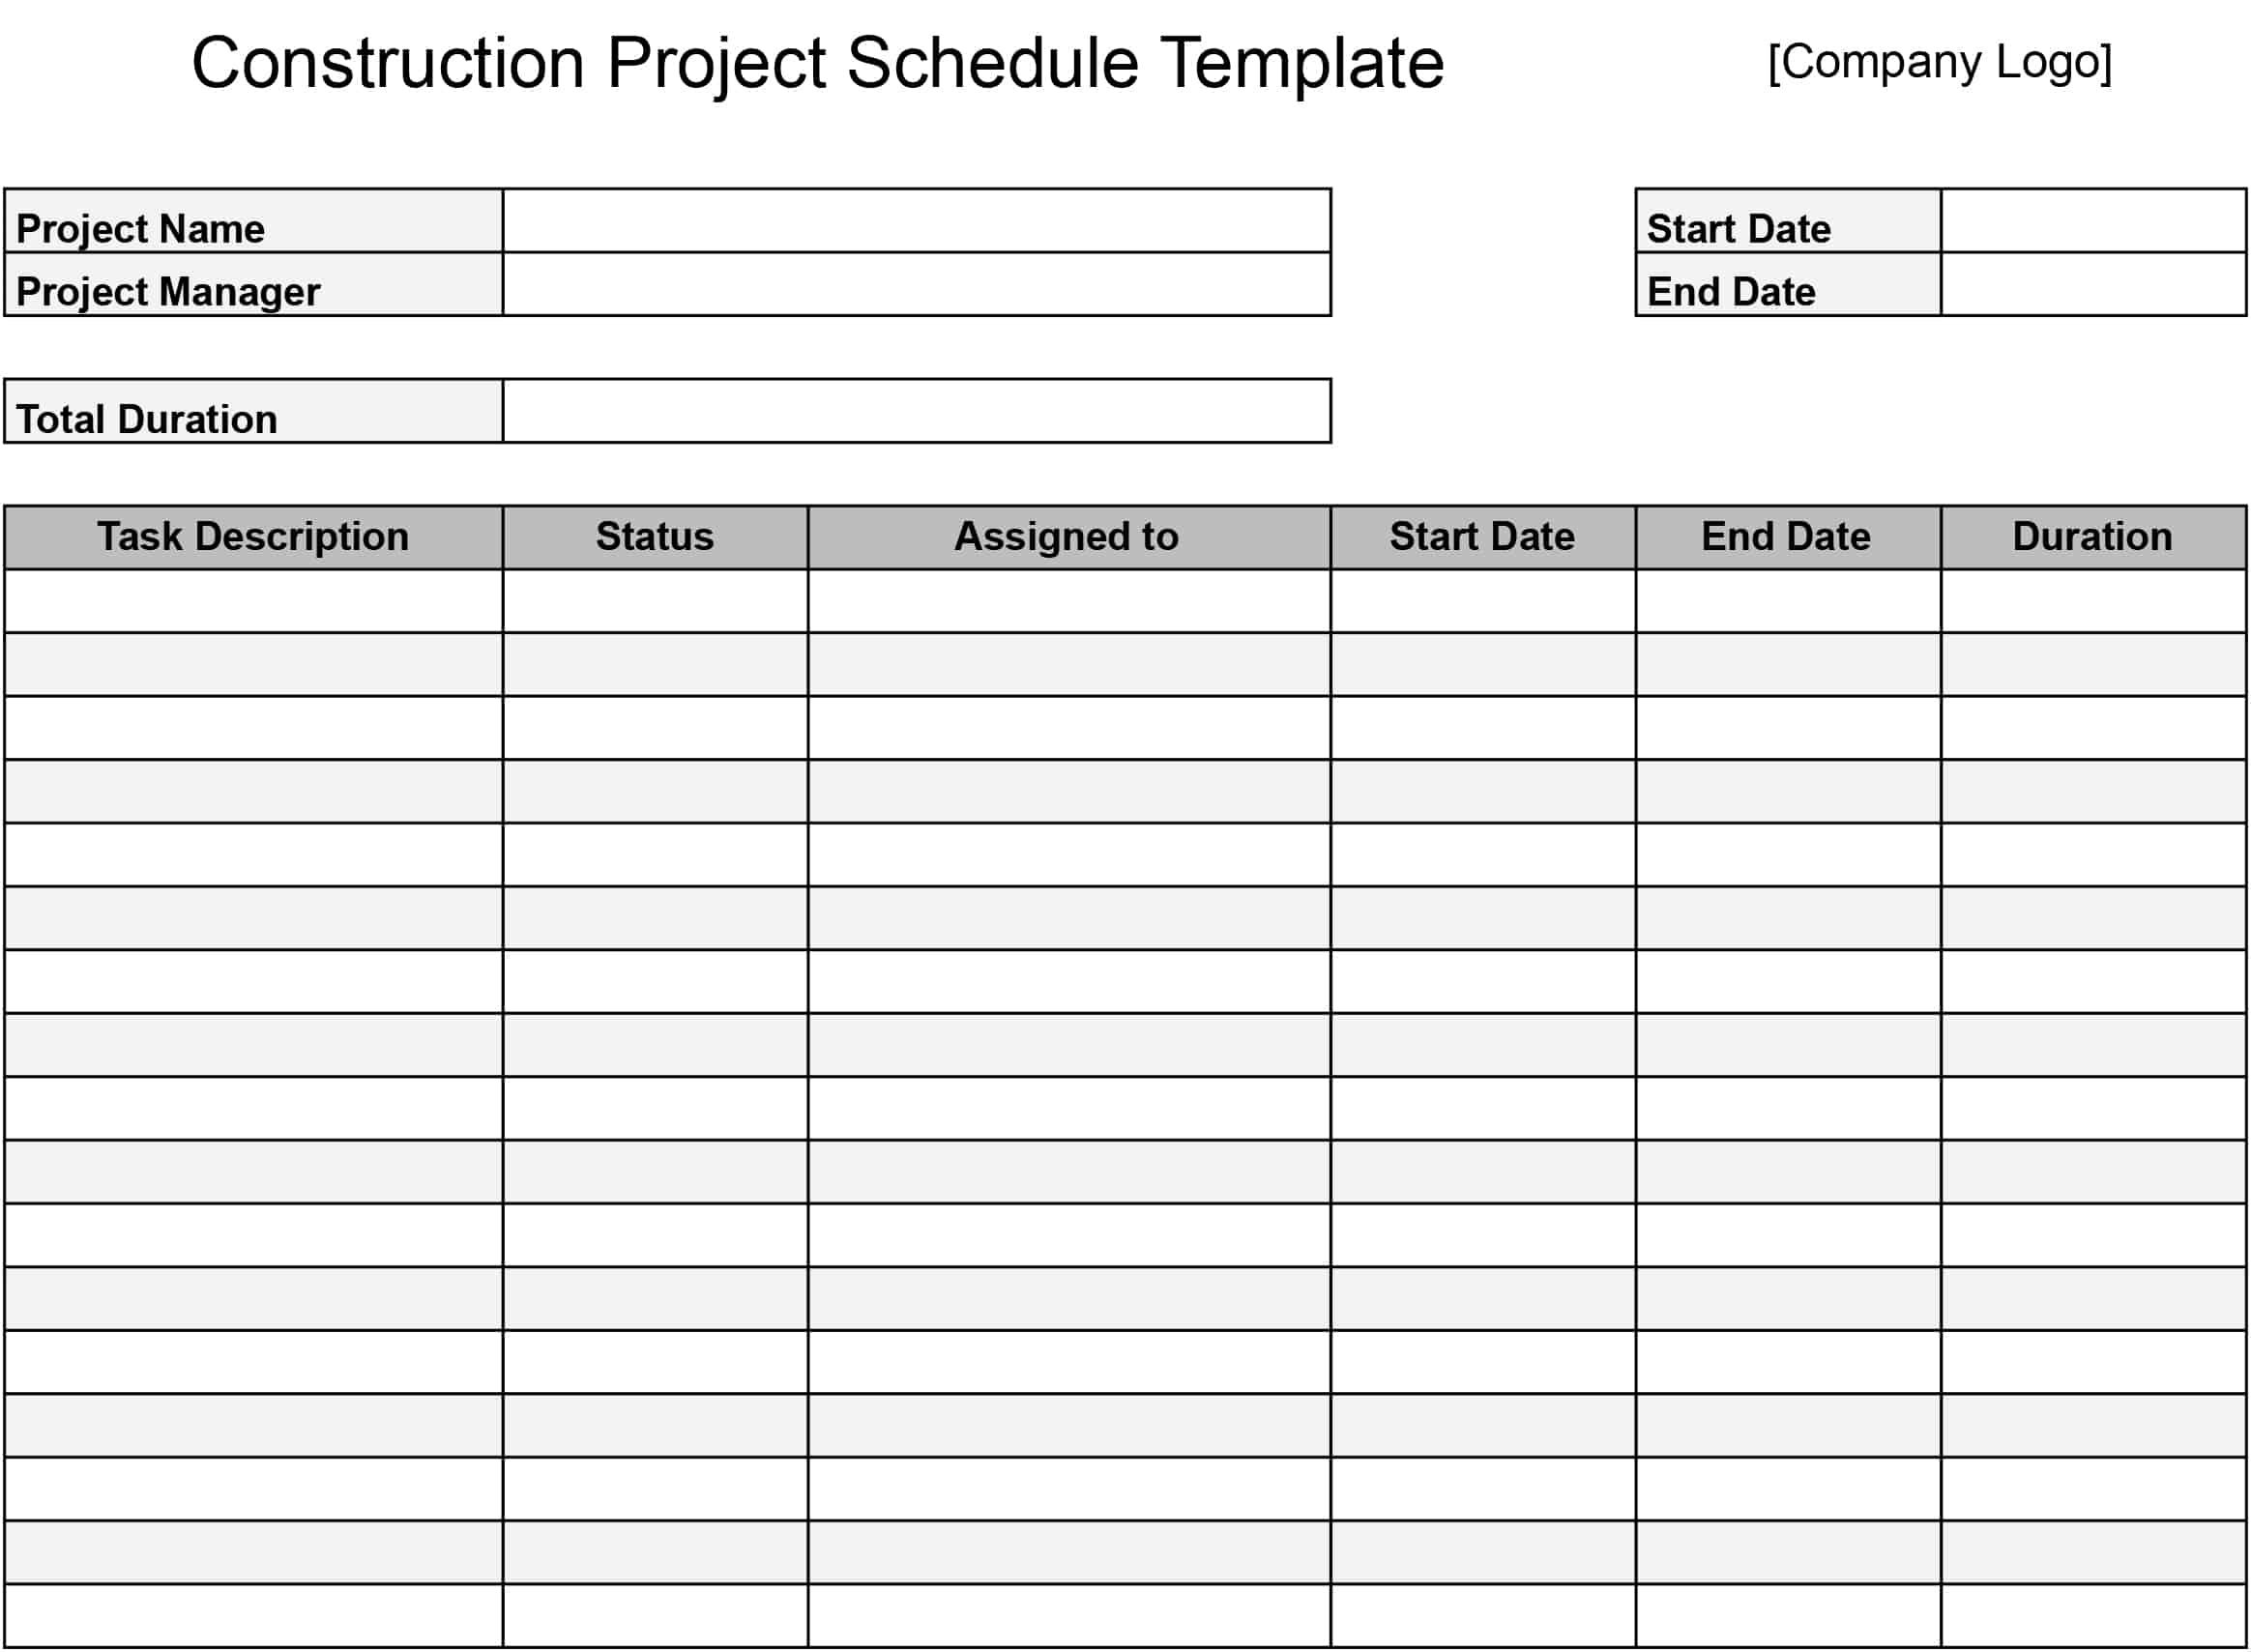 Construction Schedule Templates: Download & Print for Free!